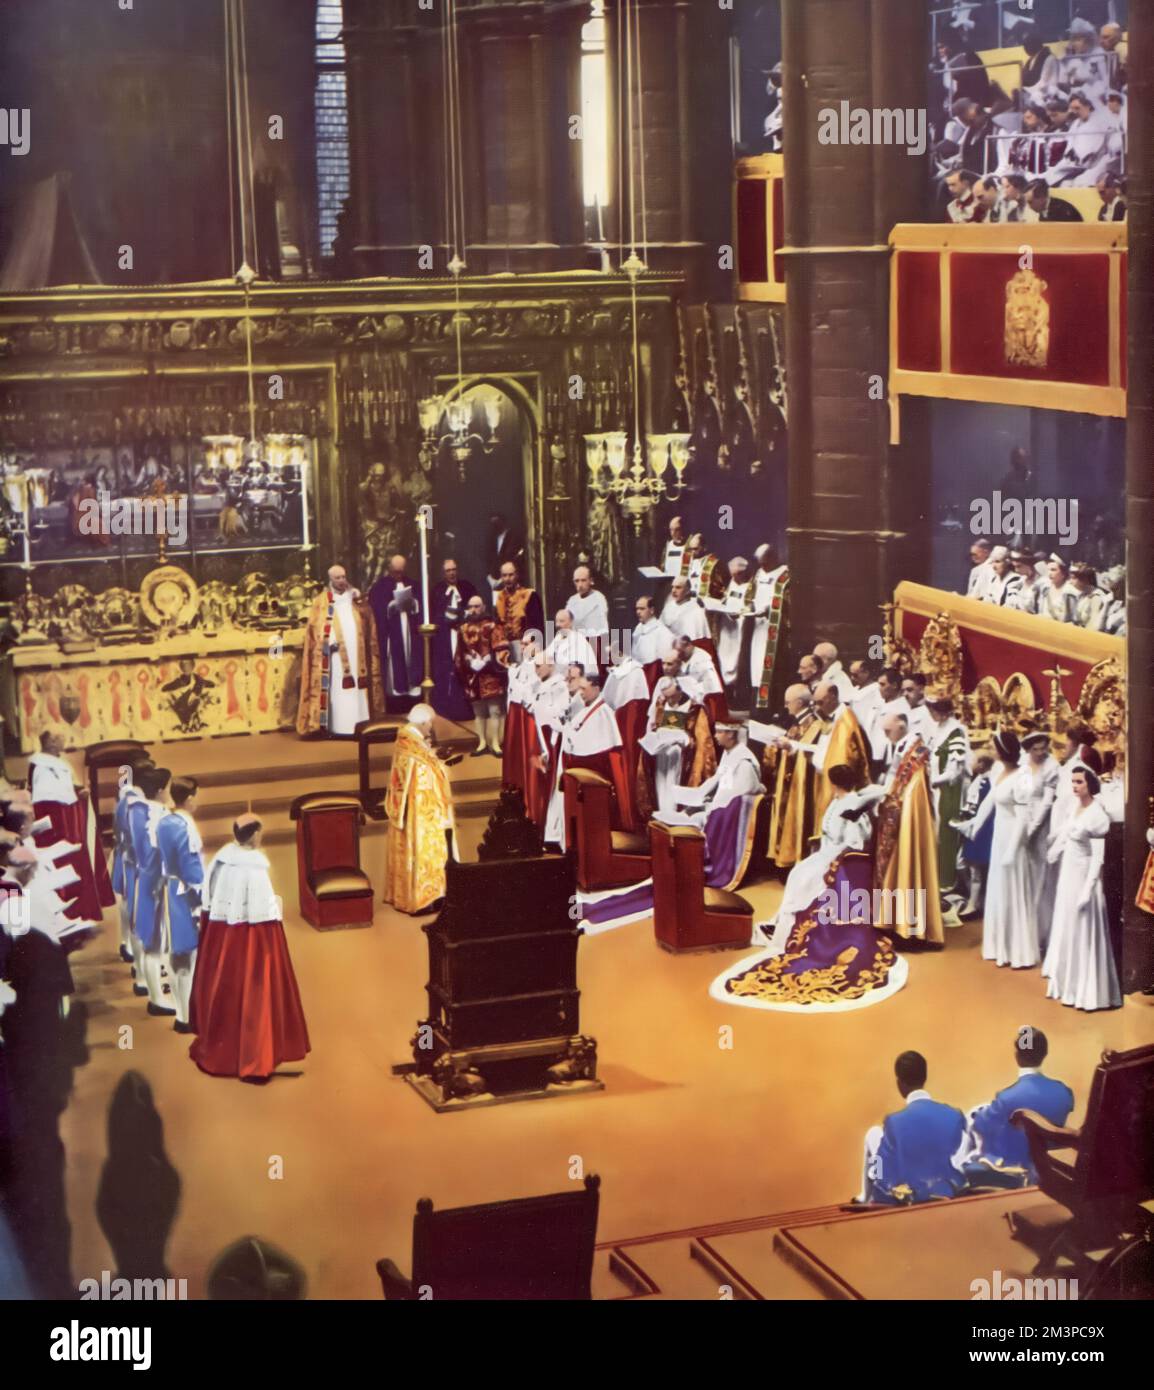 His Majesty King George VI (1895-1952), being asked to swear his coronation oath. George VI's coronation took place on 12th May 1937 at Westminster Abbey, the date previously intended for his brother Edward VIII's coronation. Stock Photo